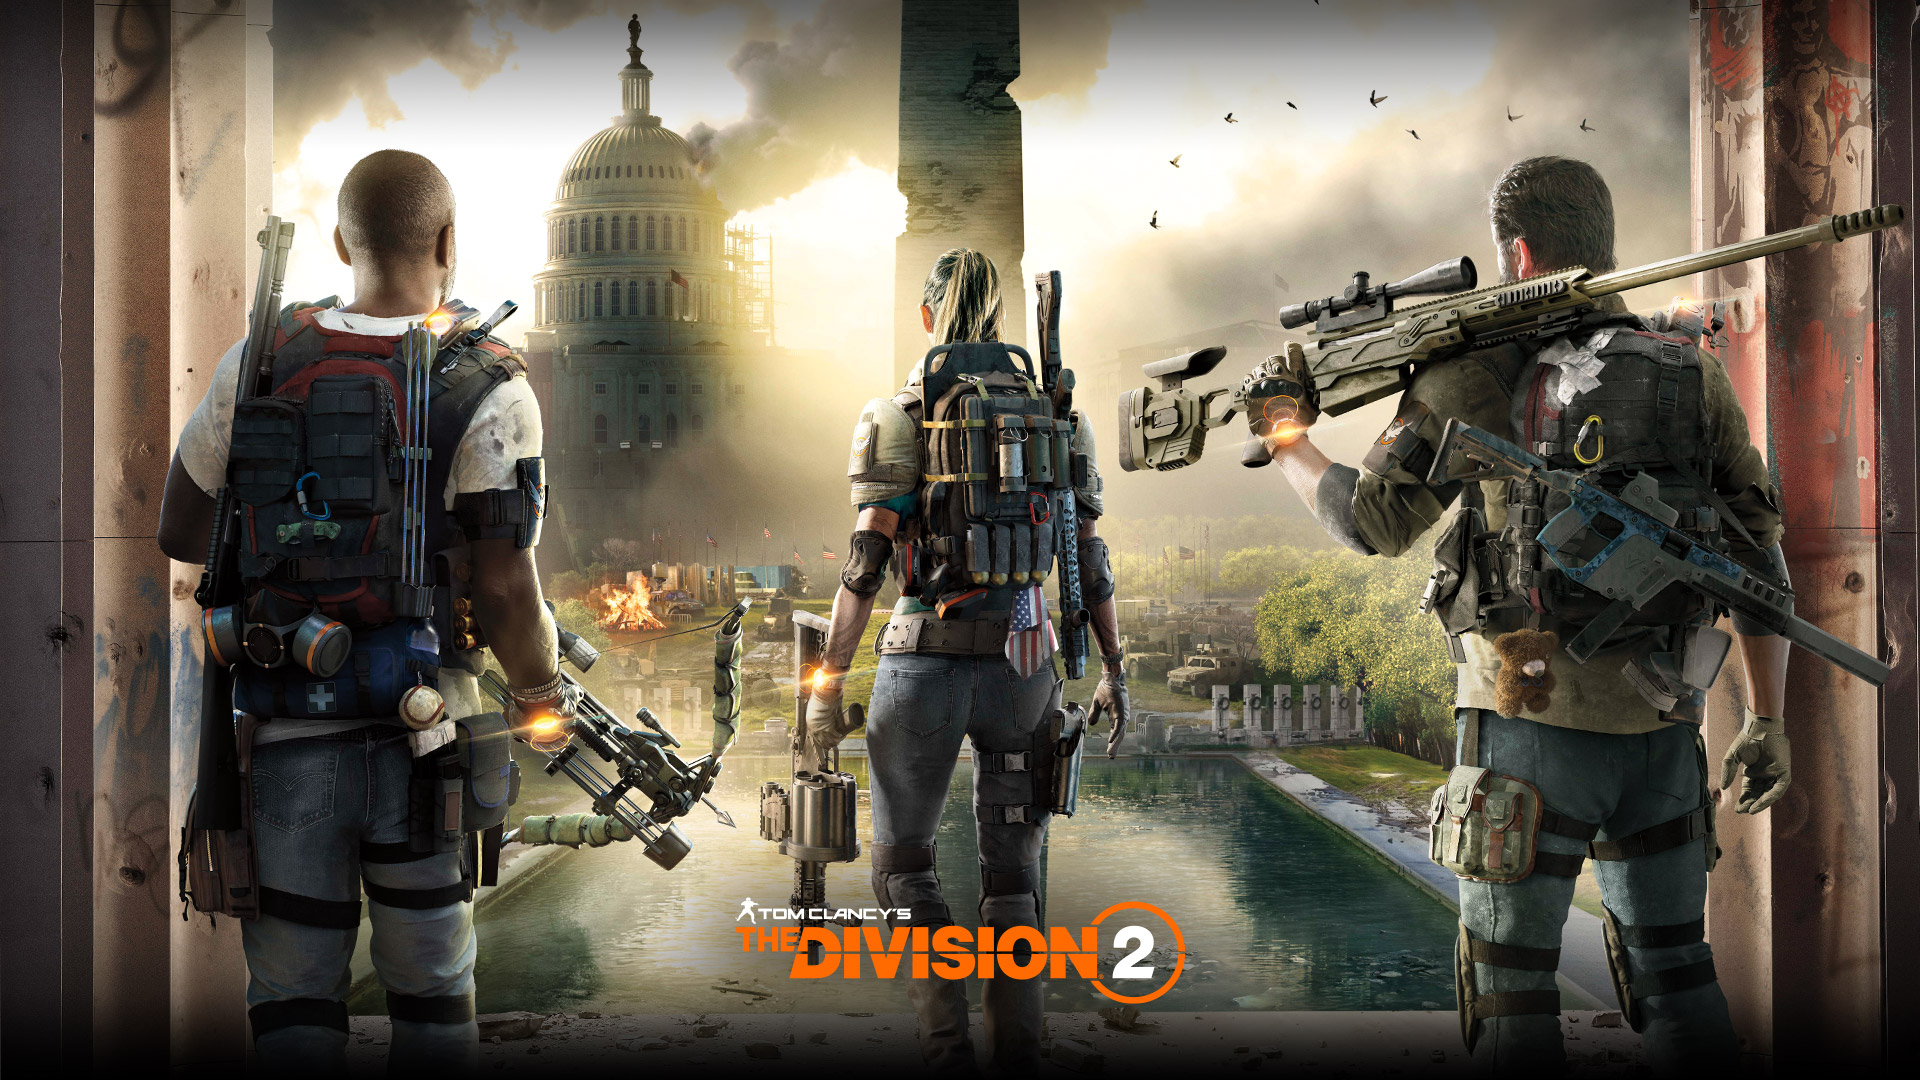 Tom Clancy’s The Division 2, three heavily-geared people look out over a ravaged Washington D.C.